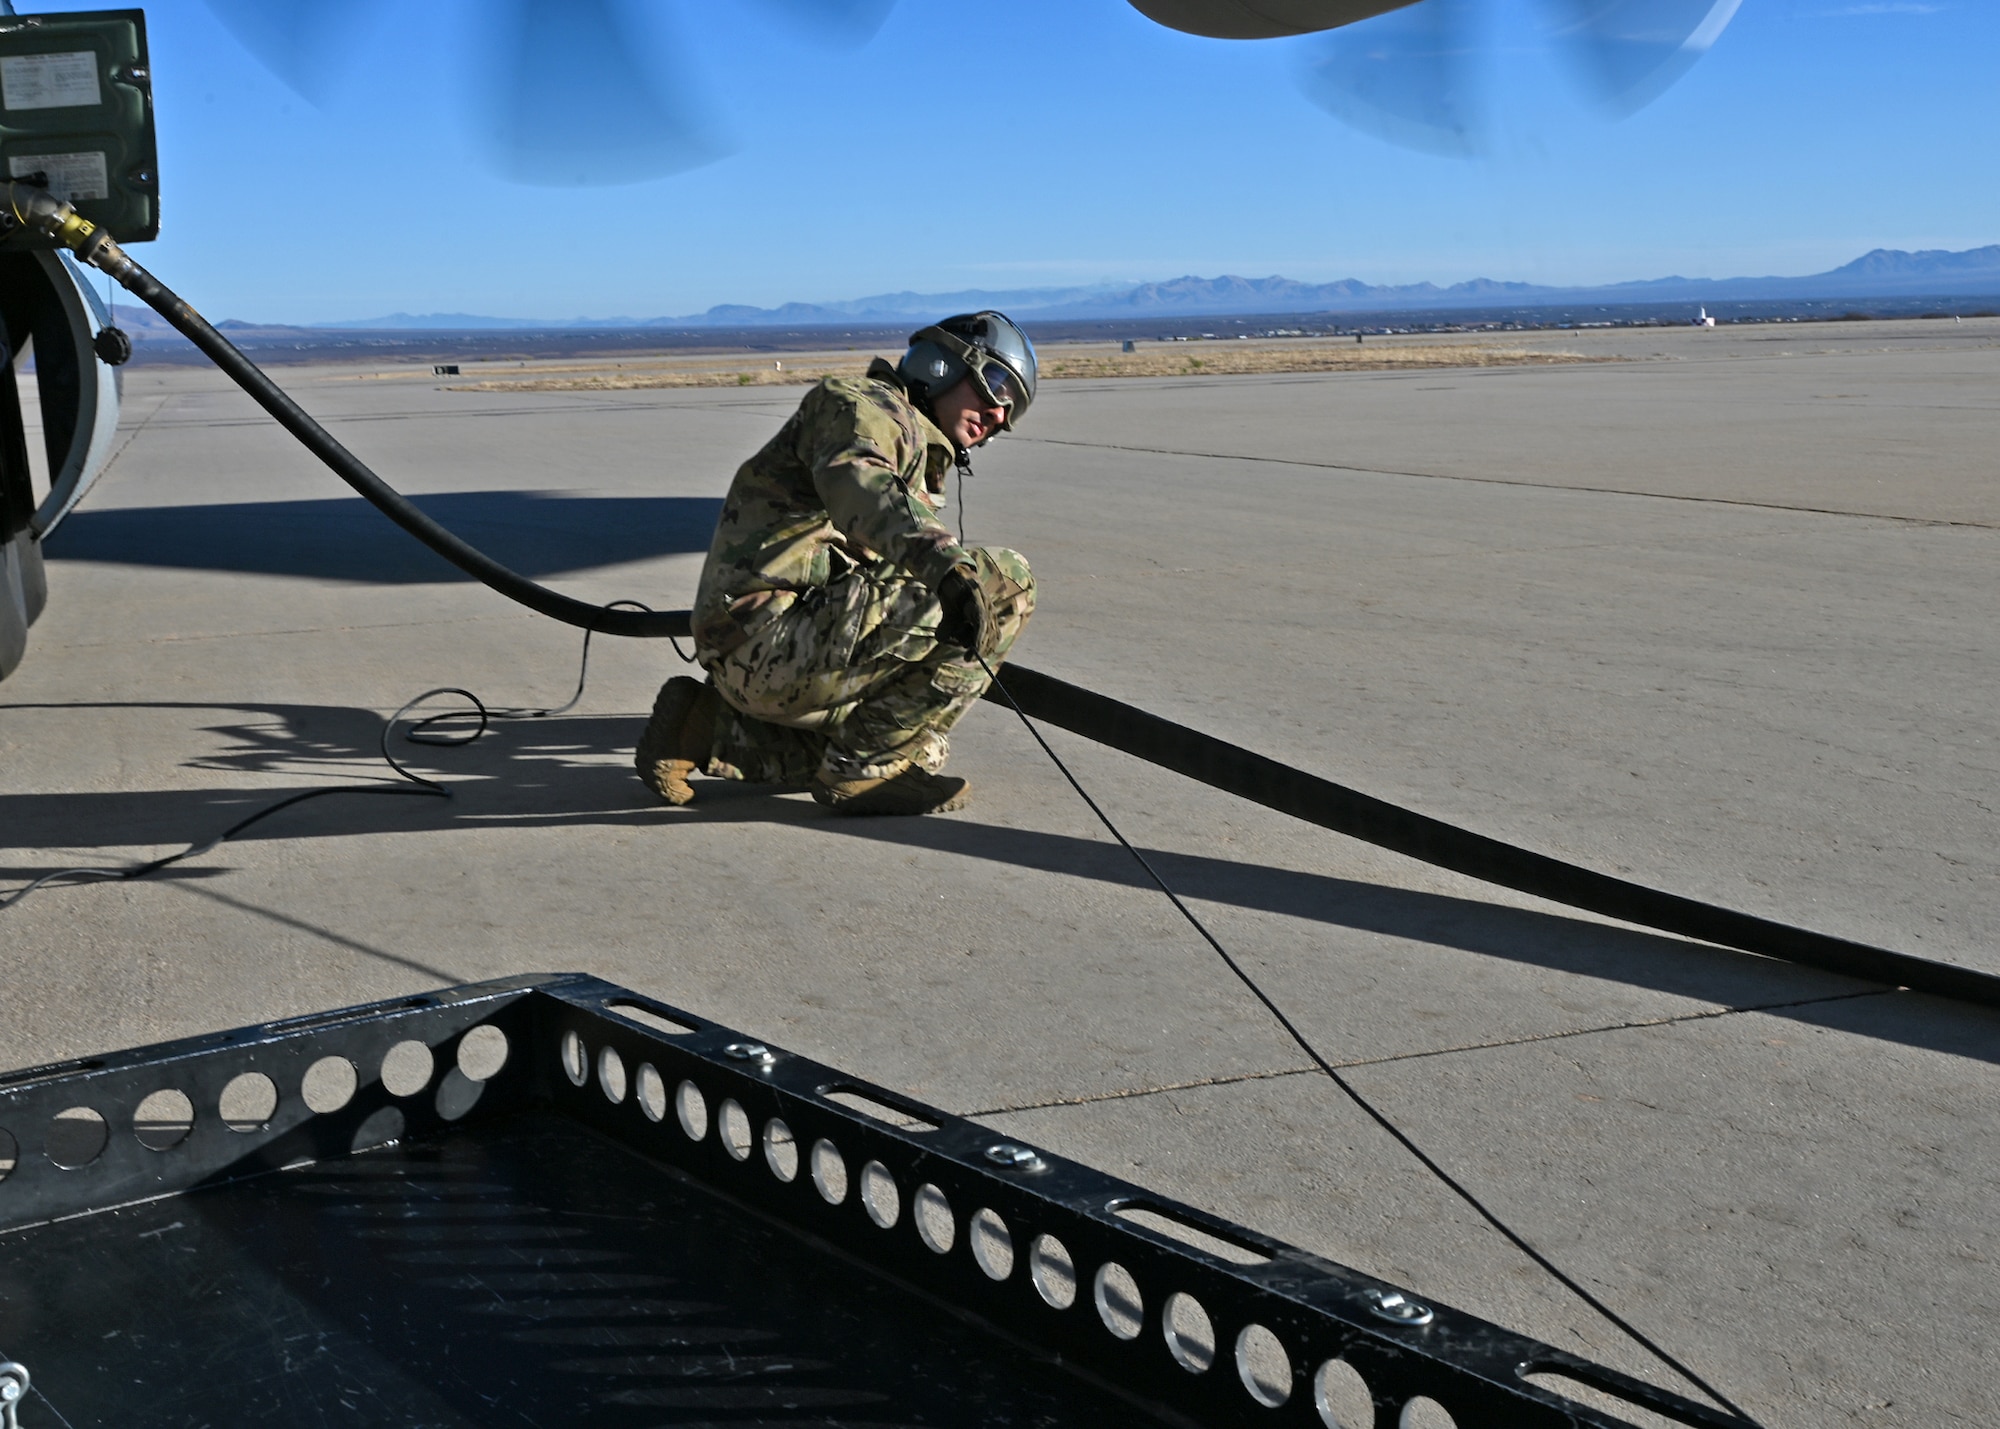 A U.S. Airman assigned to the 355th Logistics Readiness Squadron prepare for a forward area refueling point during Exercise Agile Angel at Fort Huachuca, Ariz., Feb. 20, 2024. The purpose of FARP operators was to expeditiously transfer fuel from a tanker aircraft into a receiver aircraft, while aircraft engines remain on. (U.S. Air Force photo by Staff Sgt. Abbey Rieves)